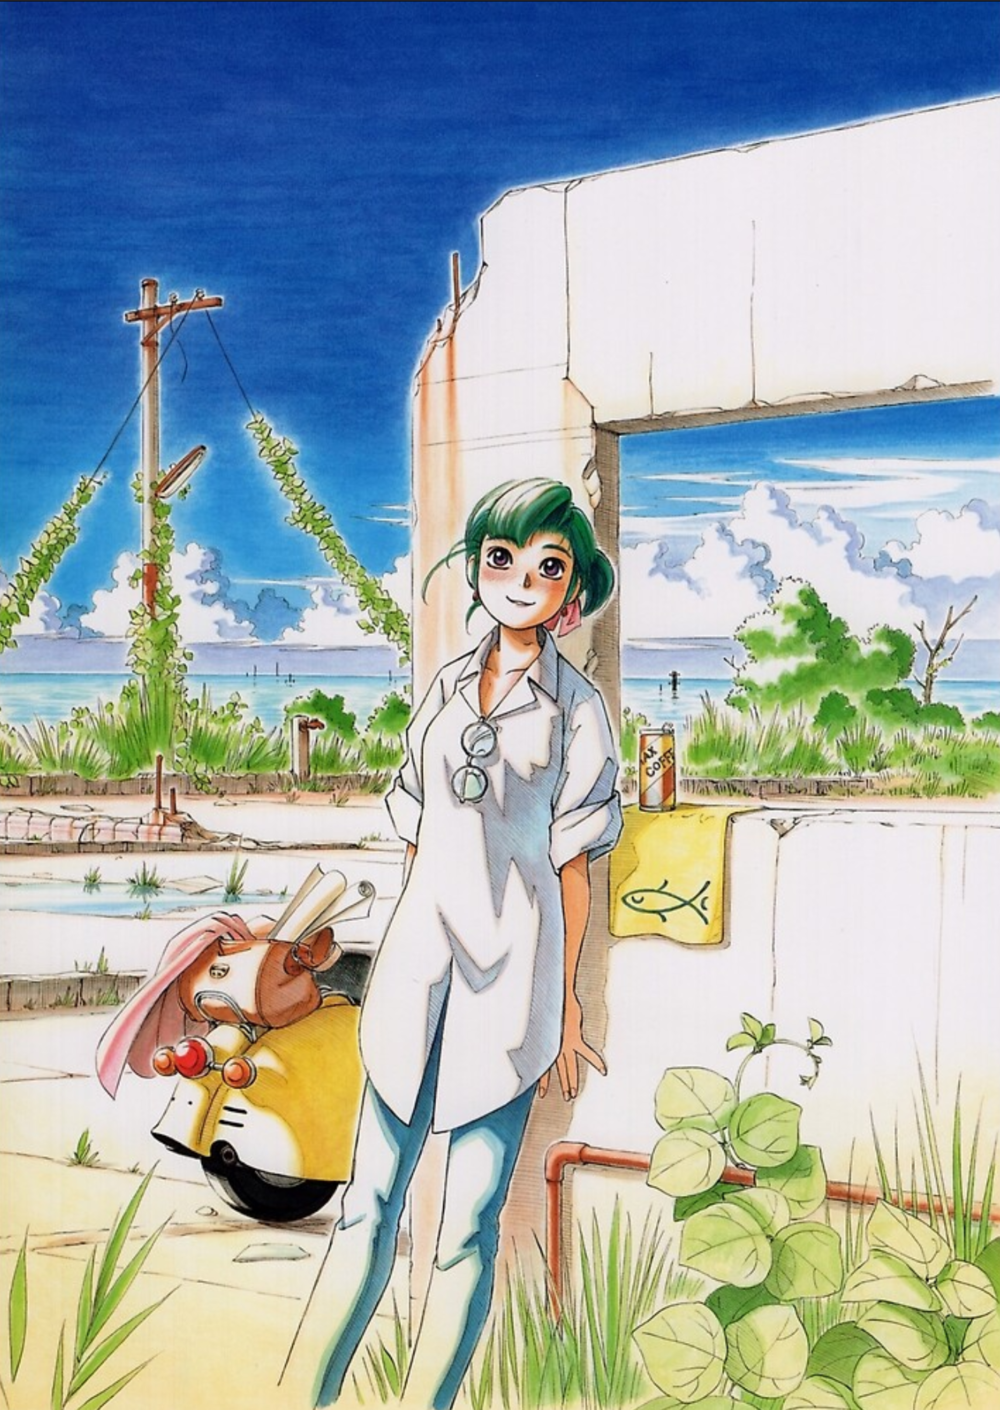 This image is an illustrated scene that features a young woman with short green hair standing outside by a large, weathered concrete structure with an open frame. She is wearing an oversized white button-up shirt that reaches mid-thigh, light blue pants, and has a pair of round glasses dangling from her shirt’s collar. In the background, there is a bright blue sky with a few scattered clouds. Lush green vegetation surrounds the area including tall grass and plants climbing up a utility pole which stands on the left-hand side.  To her left and slightly in the background, a small yellow scooter with red headlights and wooden handles appears to have a brown bag and wrapped items attached. A beverage can labeled "COFFEE" is positioned on the concrete structure beside a yellow cloth featuring a fish drawing. The scene is vibrant with a mixture of natural and man-made elements, depicting a peaceful and sunny day near a body of water which is visible in the distance.